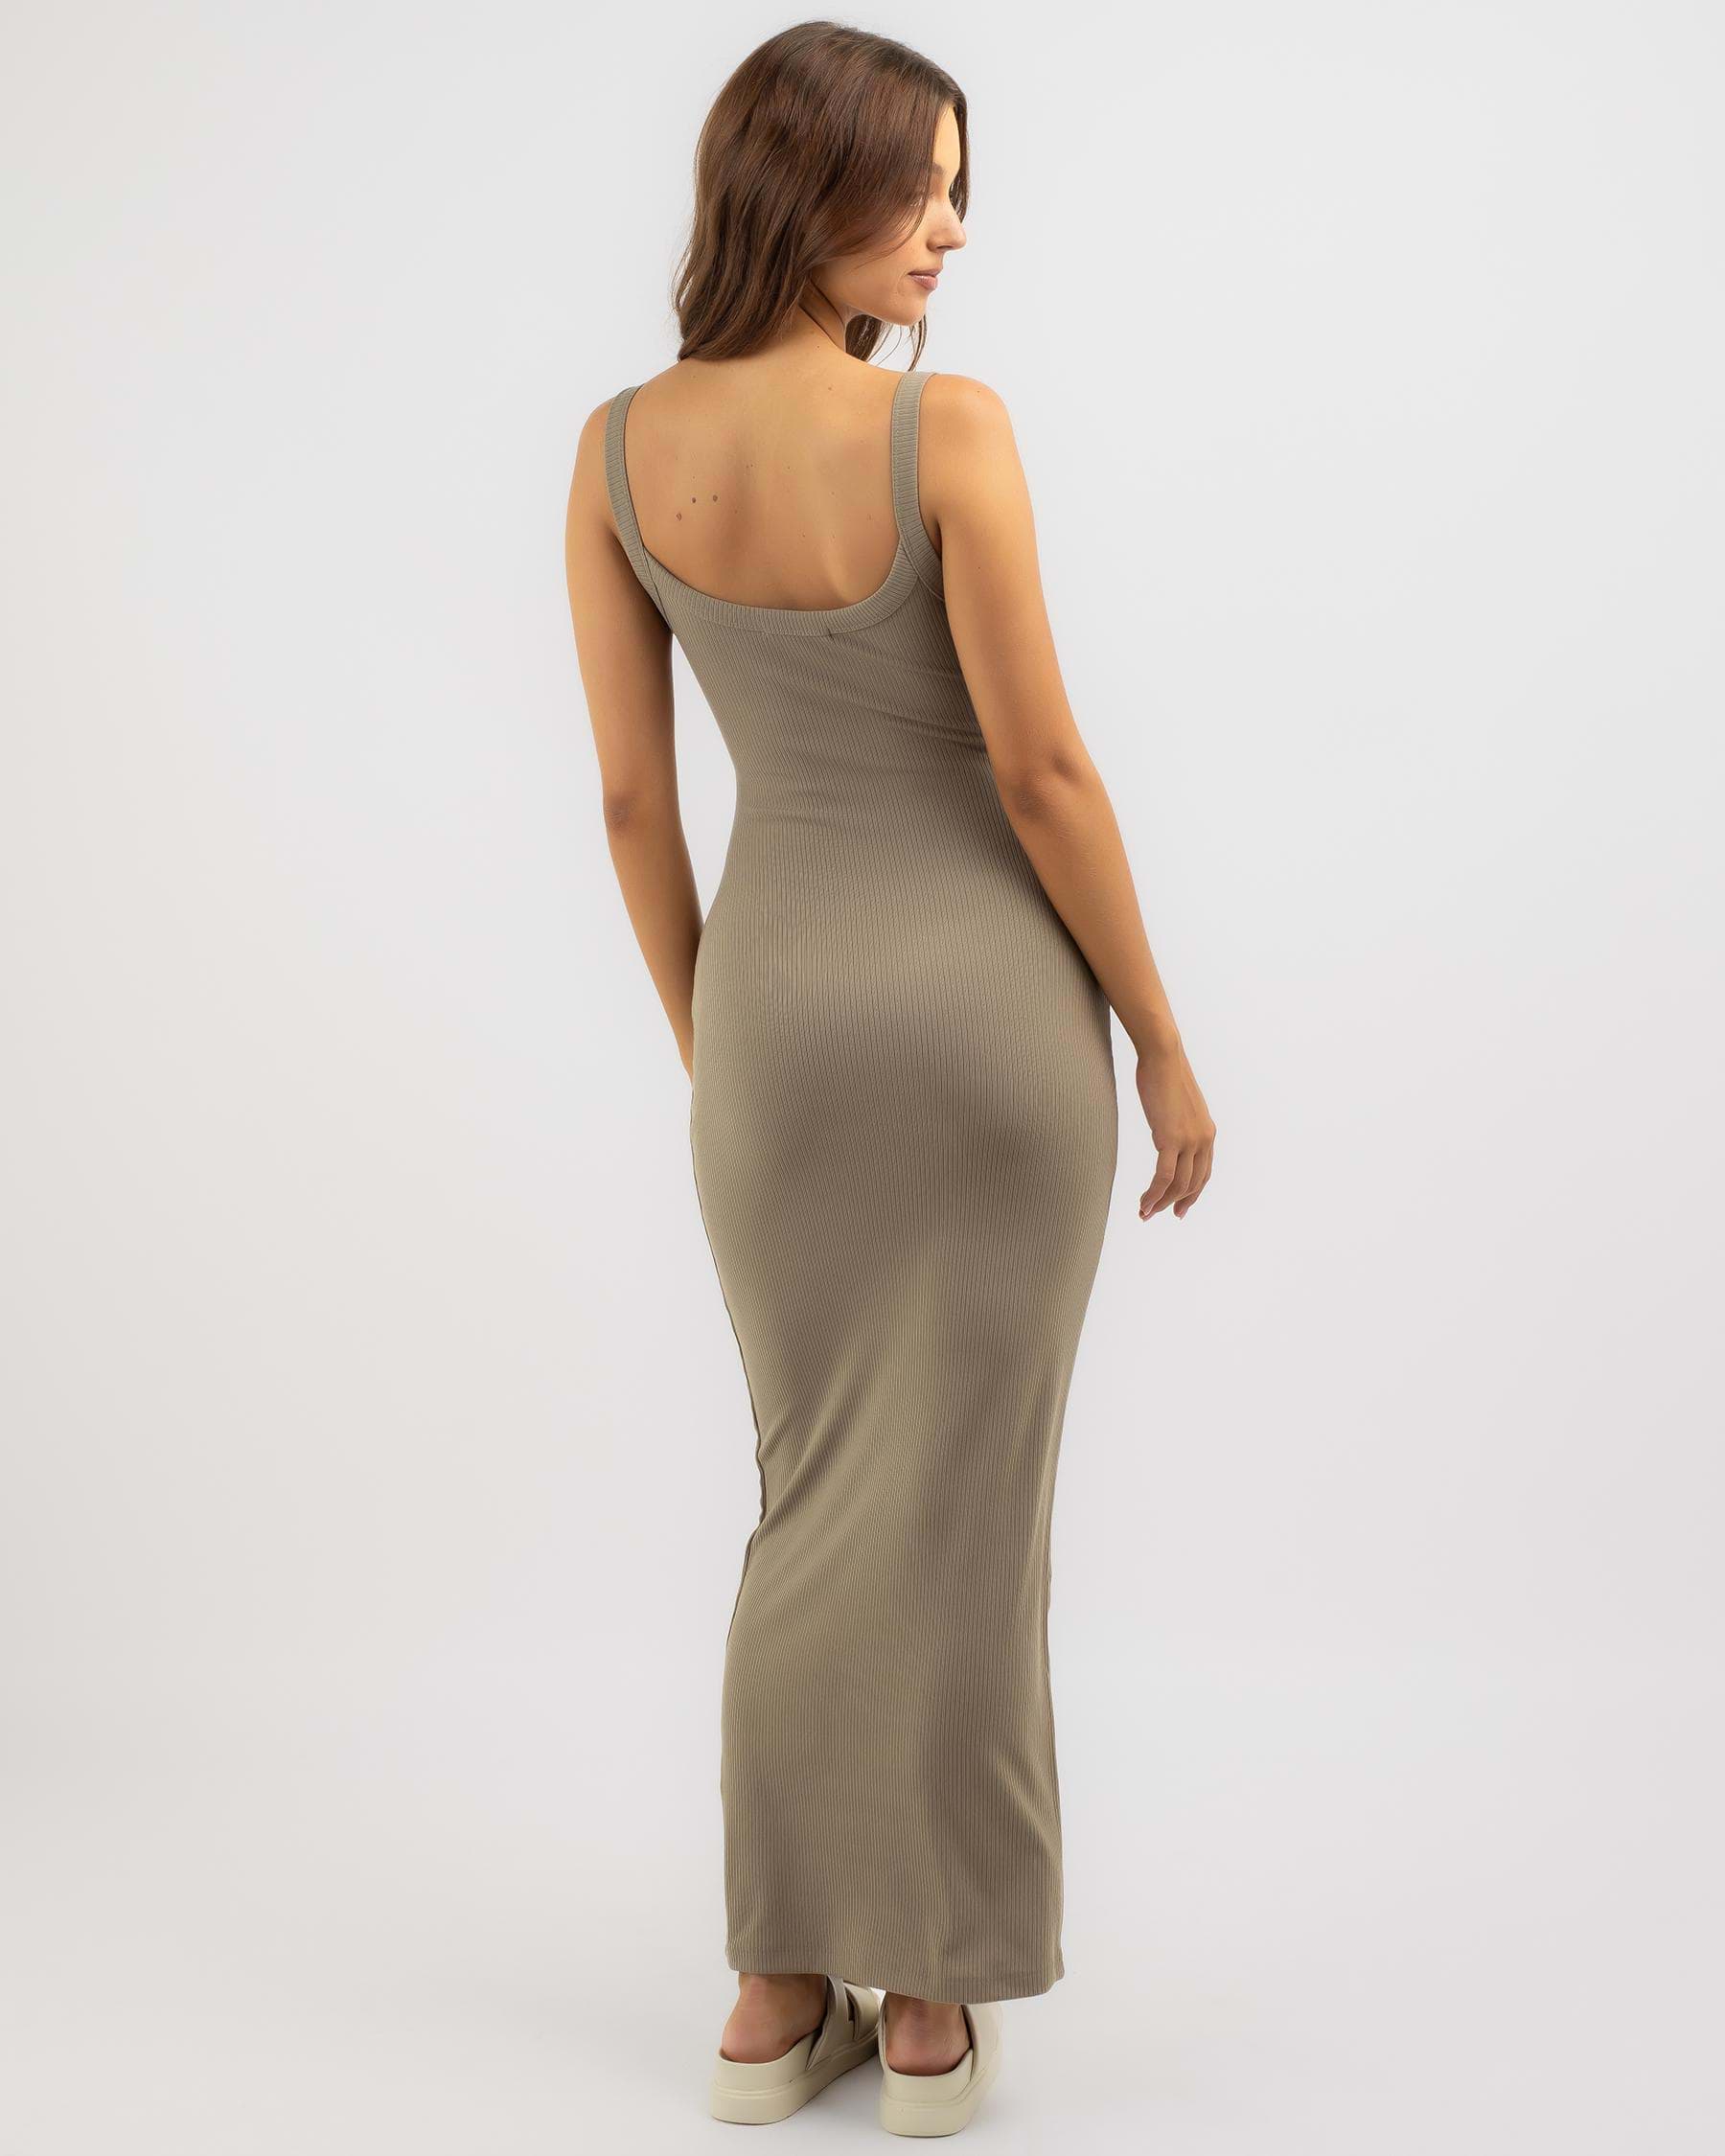 Ava And Ever Ayla Maxi Dress In Taupe - Fast Shipping & Easy Returns ...